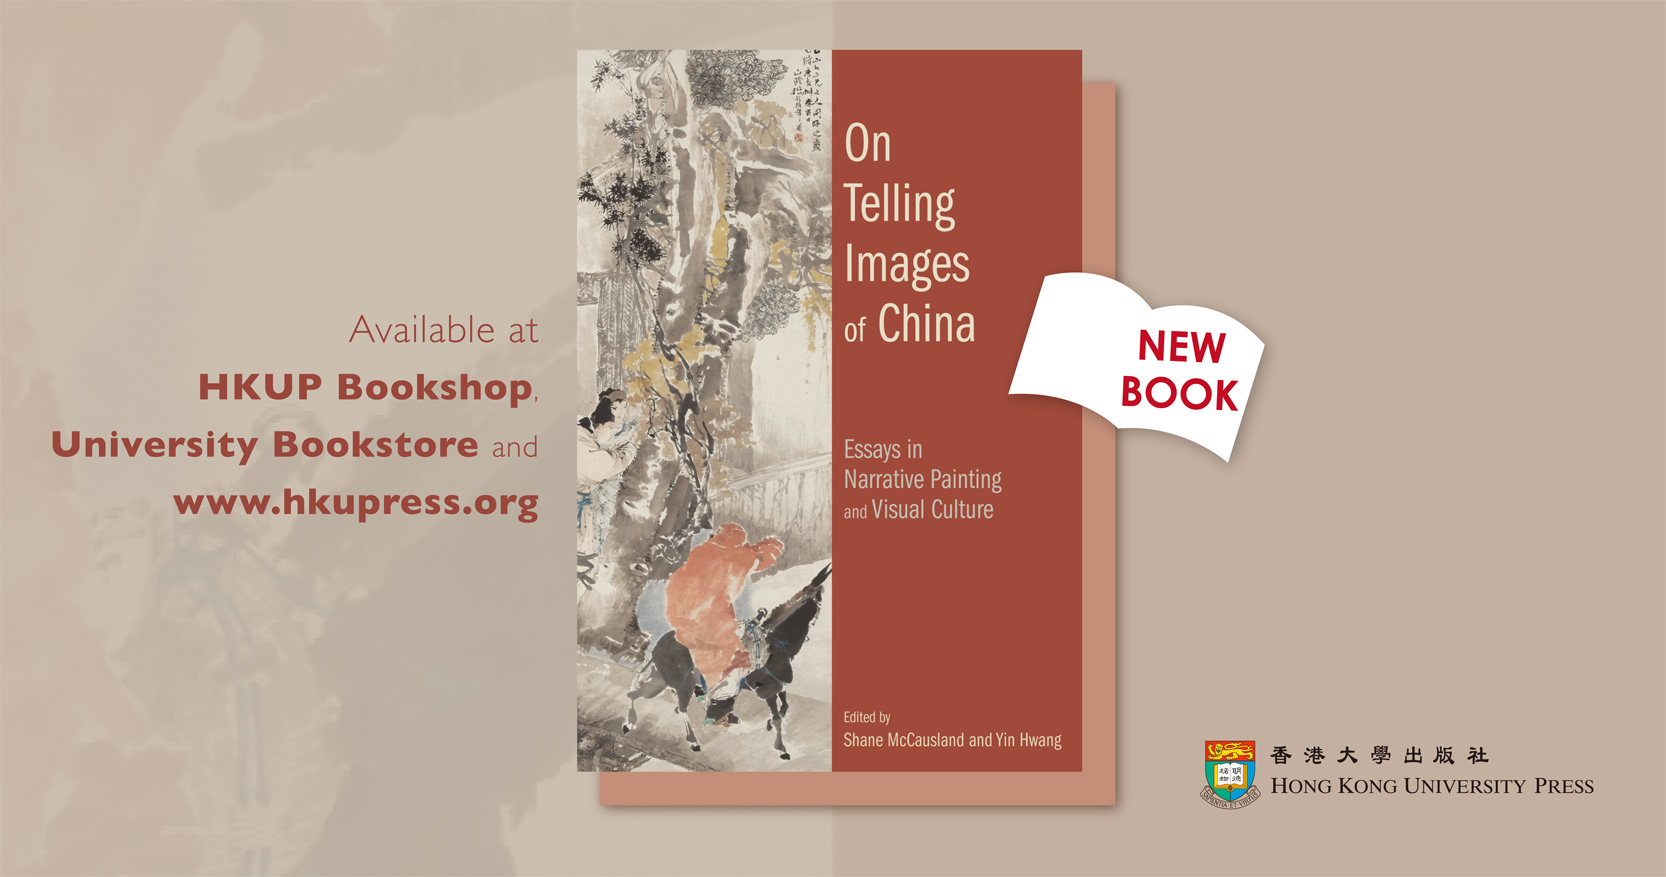 Newly published by HKU Press - On Telling Images of China